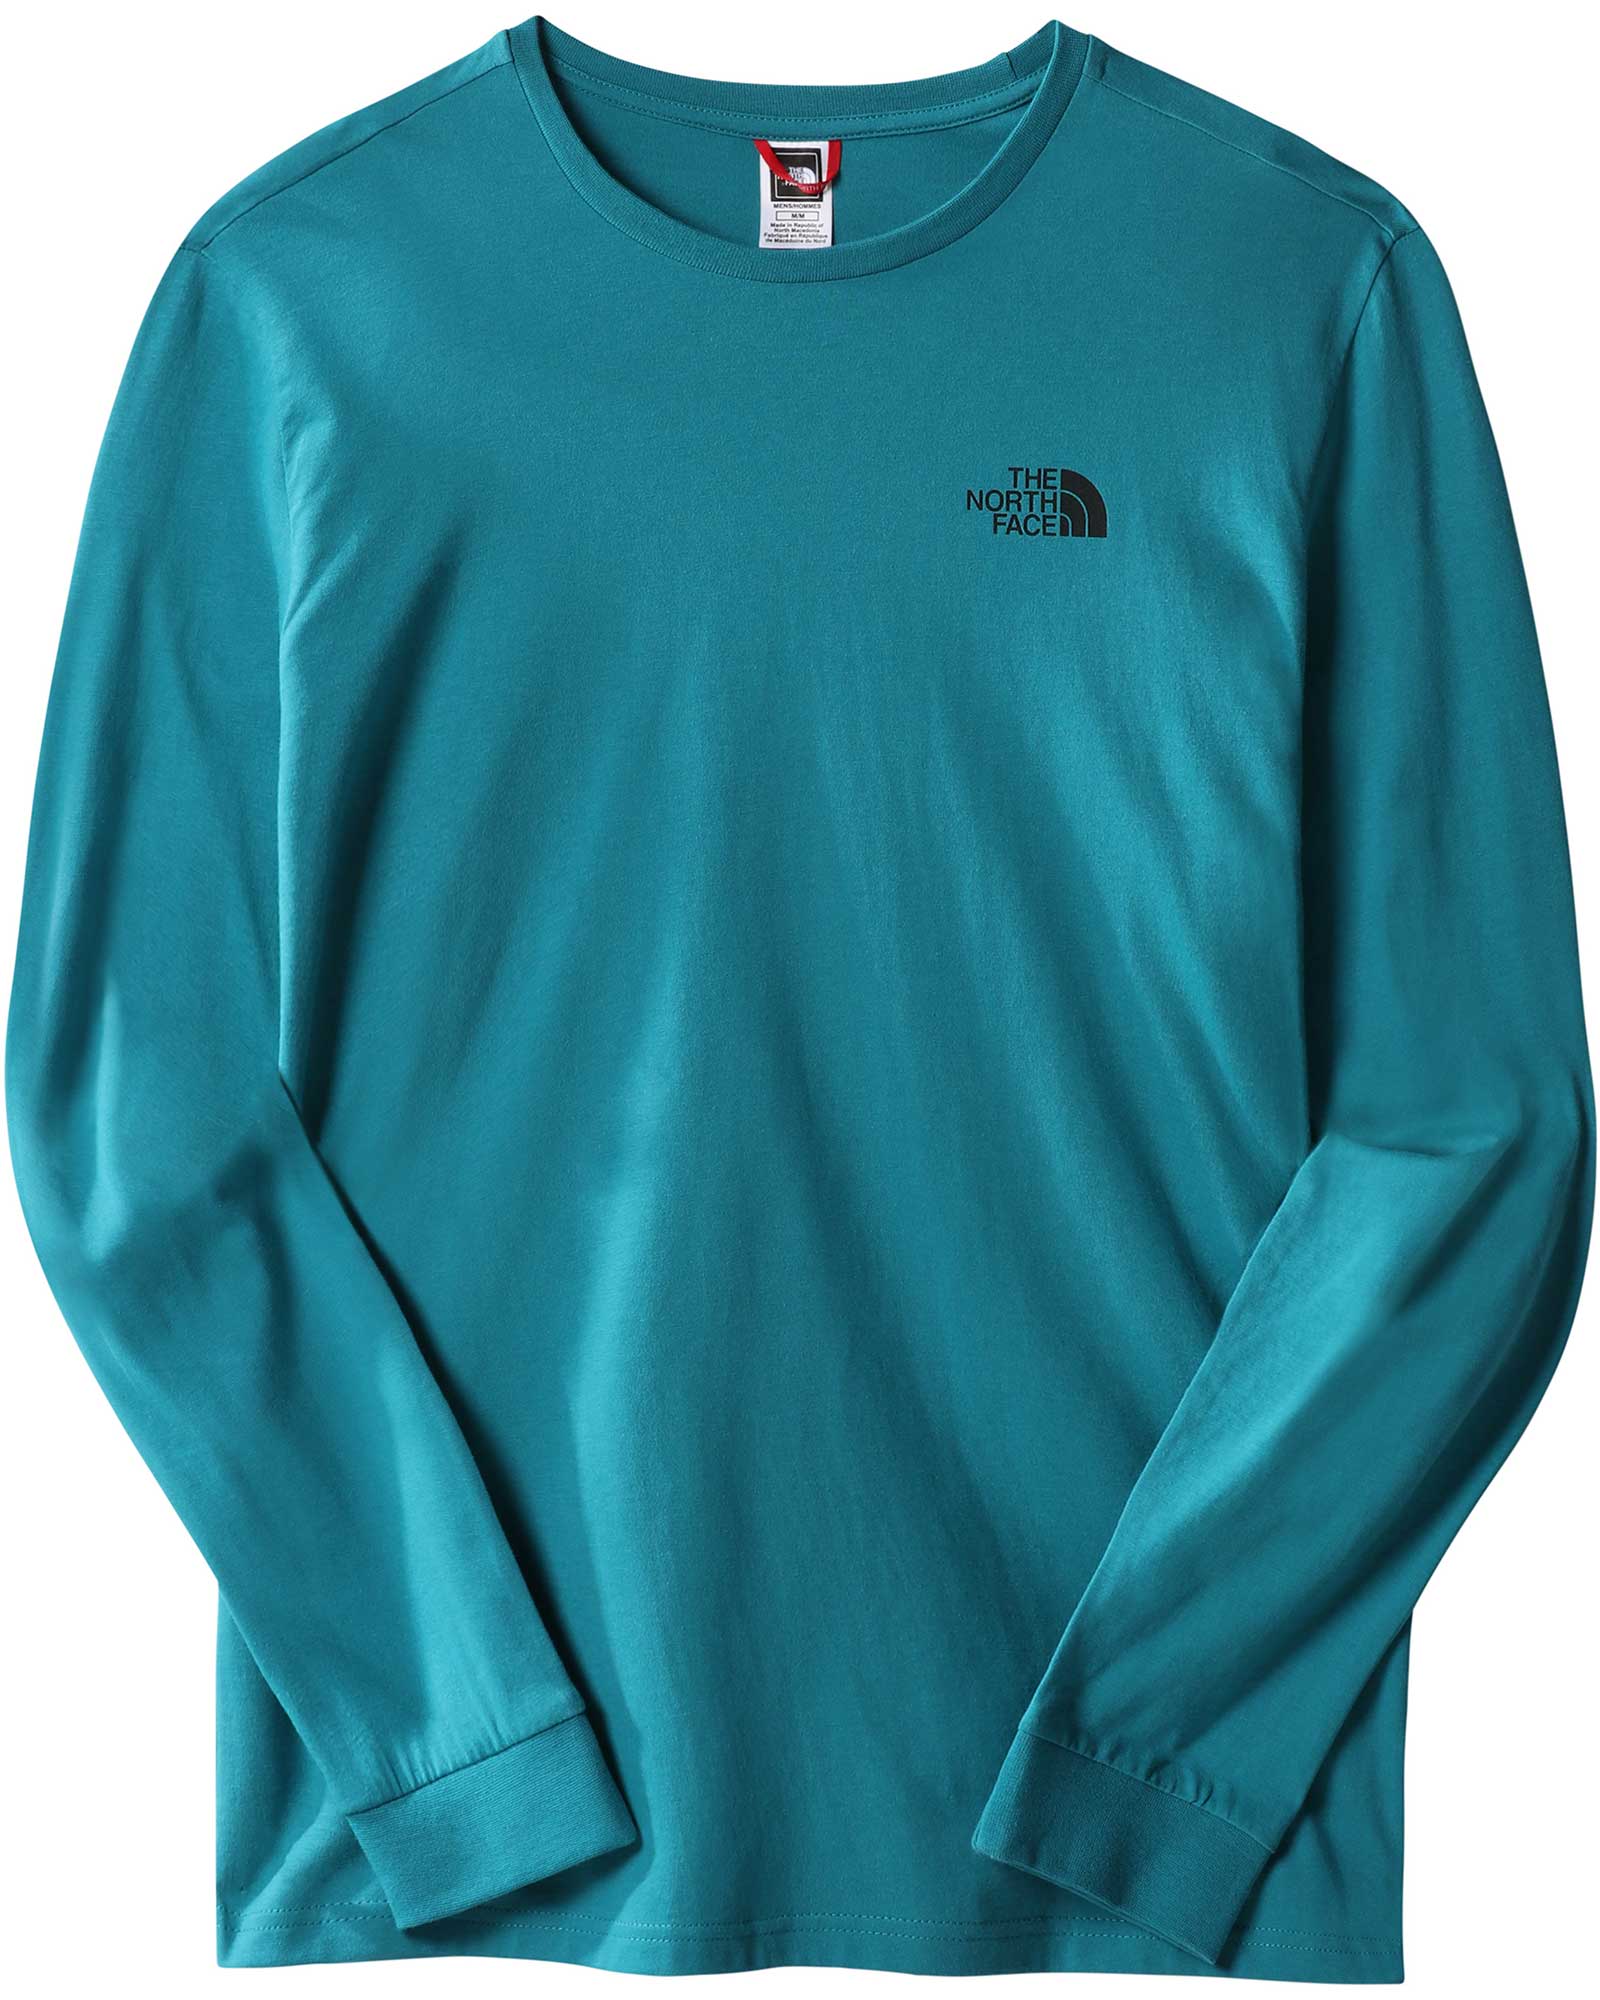 The North Face Simple Dome Men’s Long Sleeve T Shirt - Harbor Blue XS